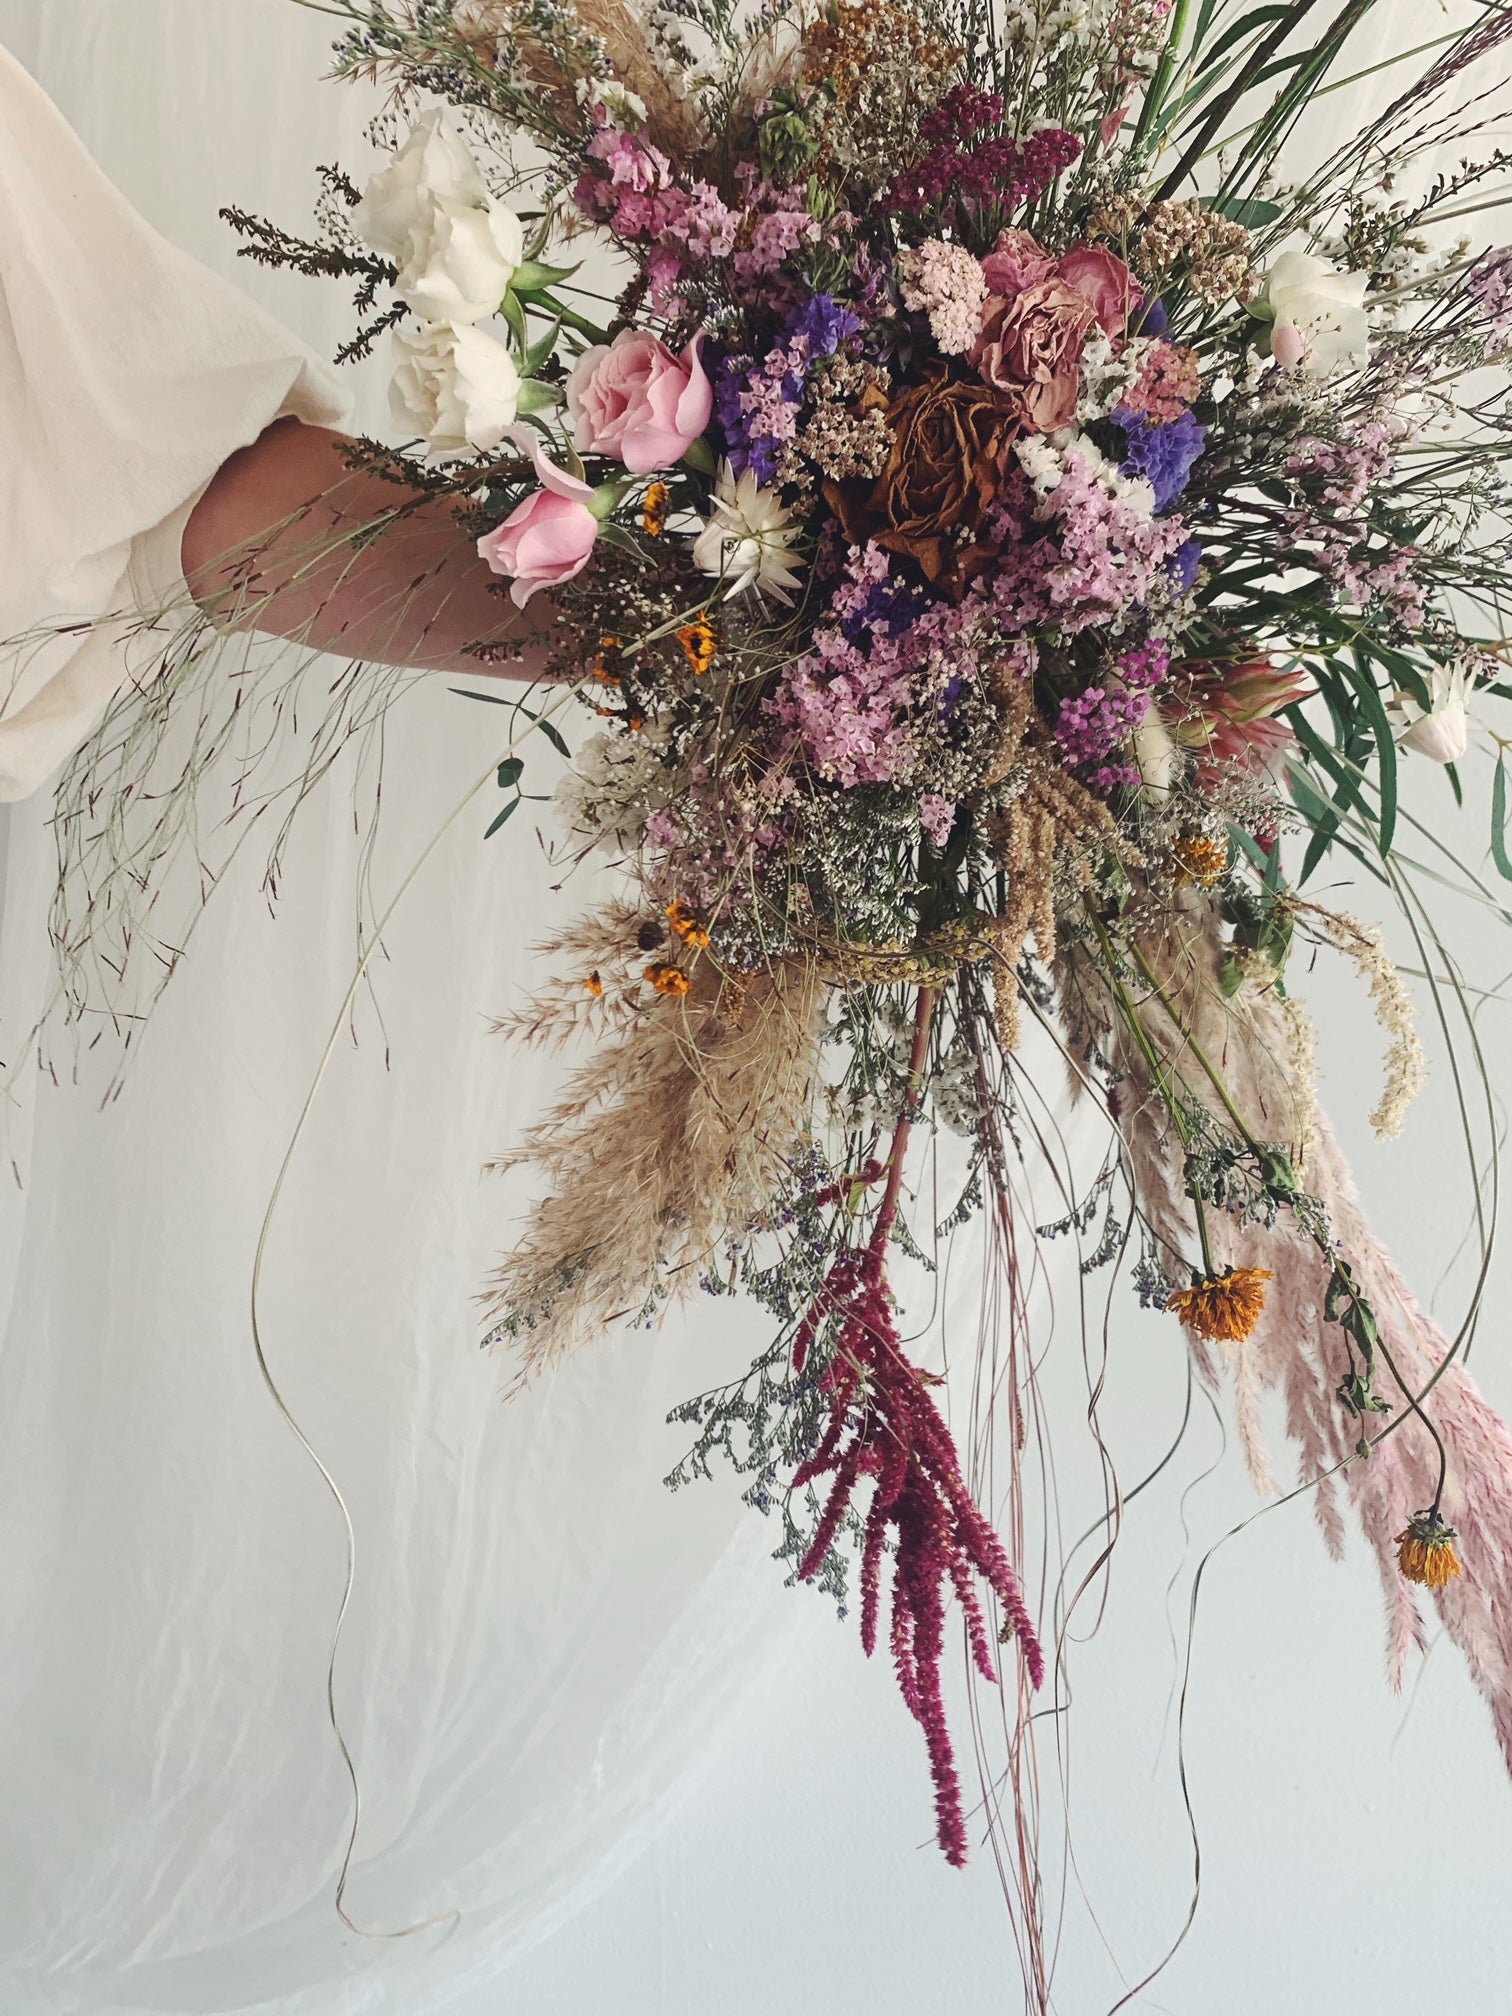 Flower Delivery Vancouver-Floral Arch Hangings-Wedding Flowers-Florist-The Wild Bunch Flower Shop